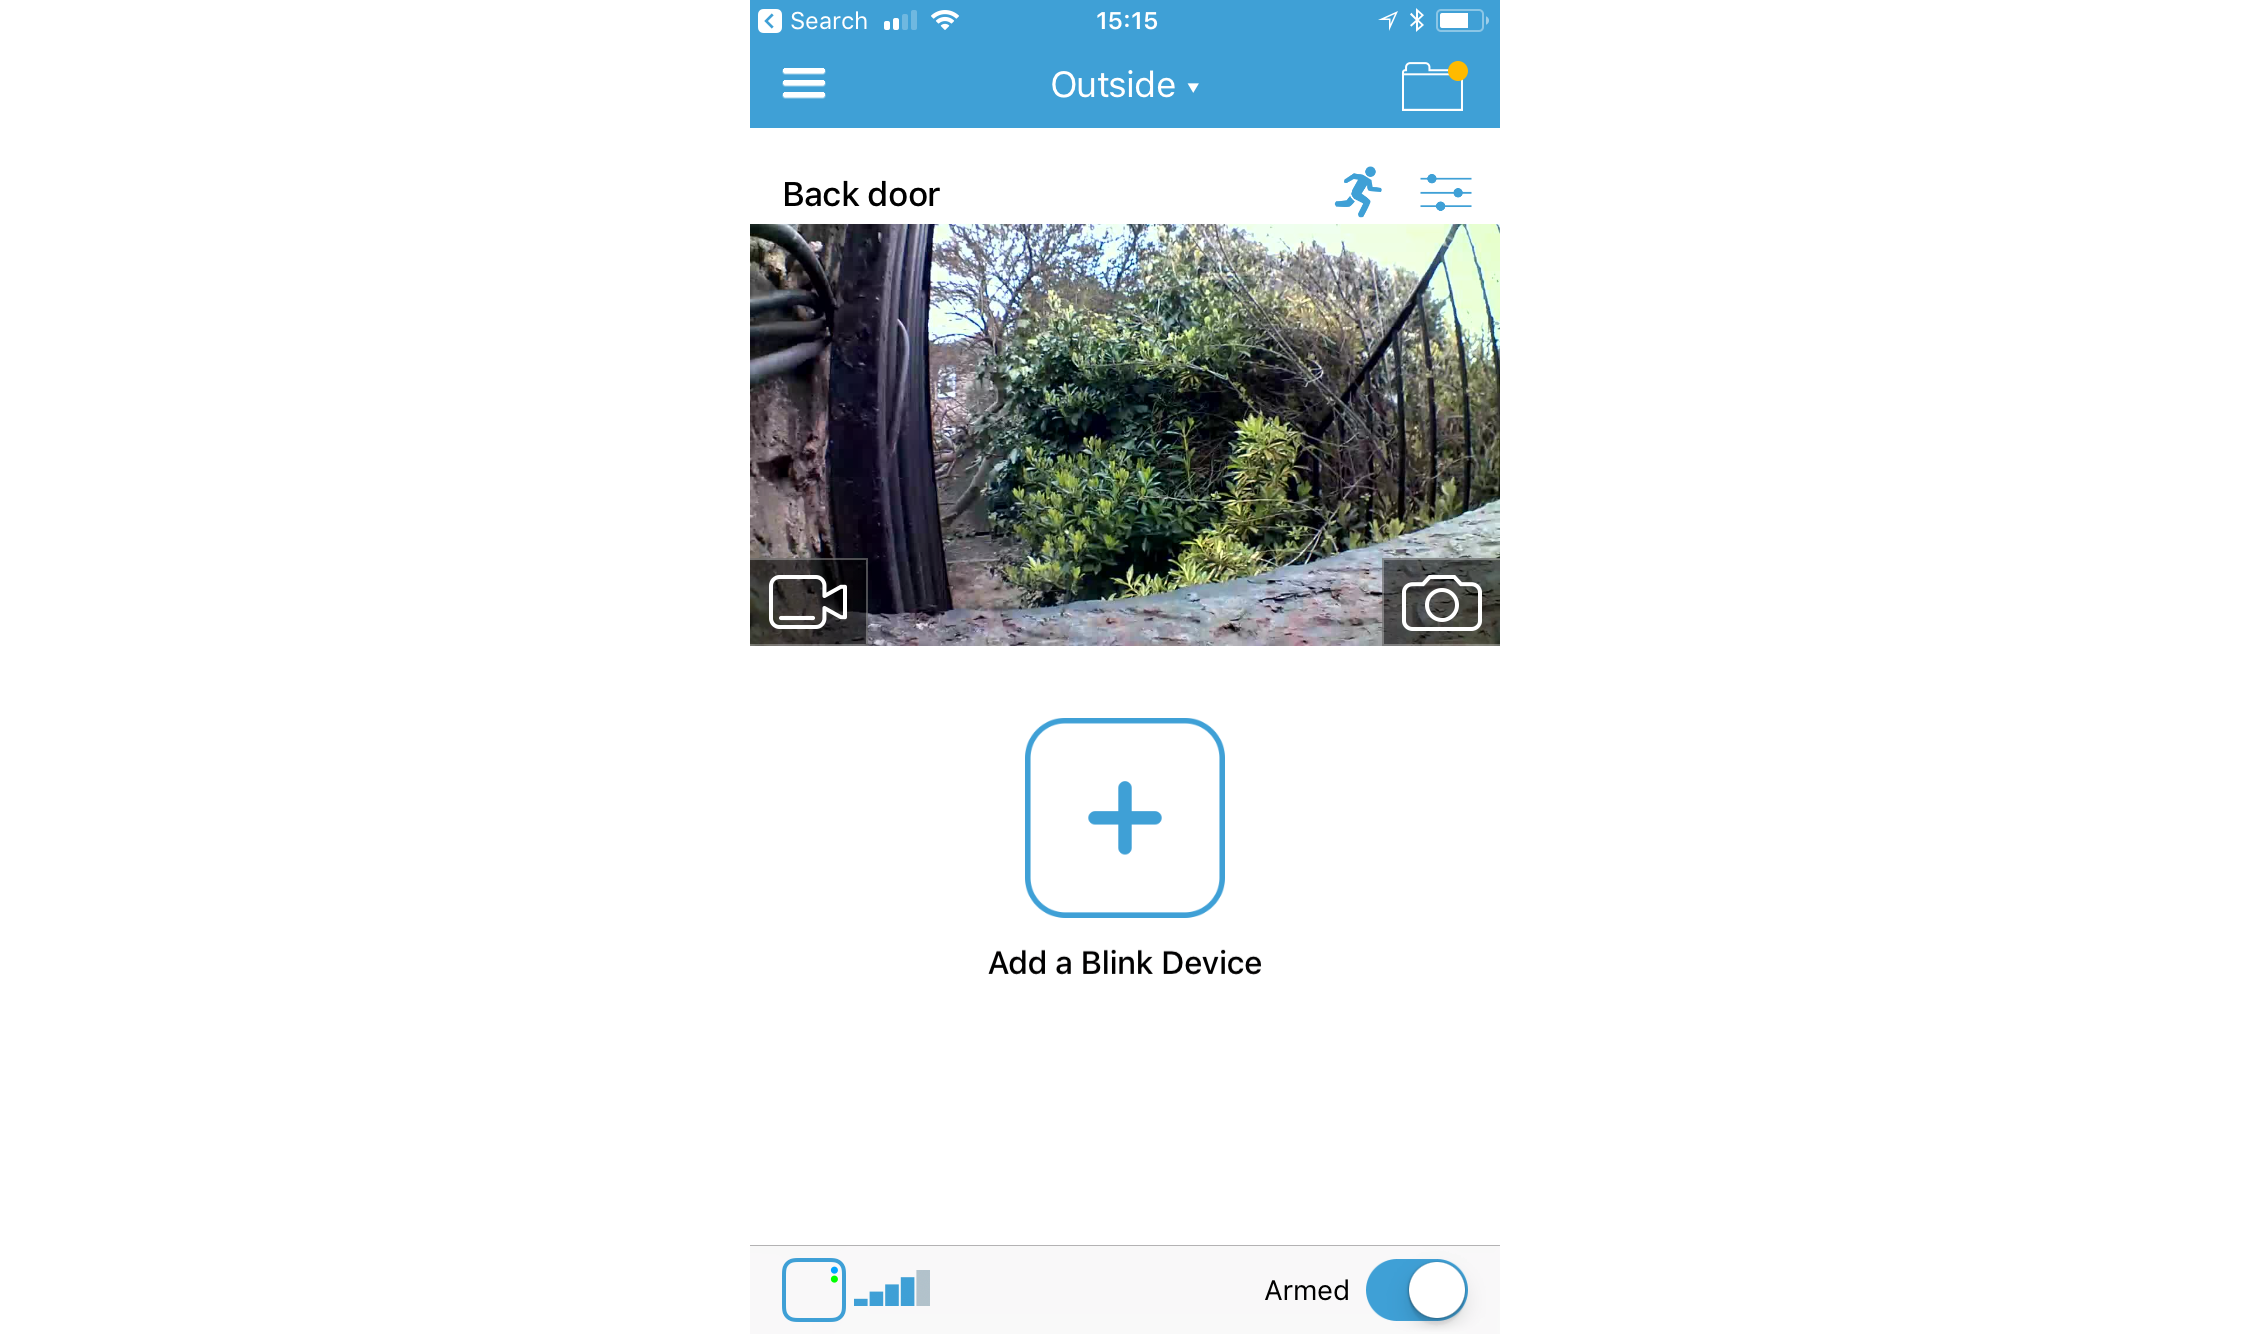 Blink XT camera interface with a view of a backyard.